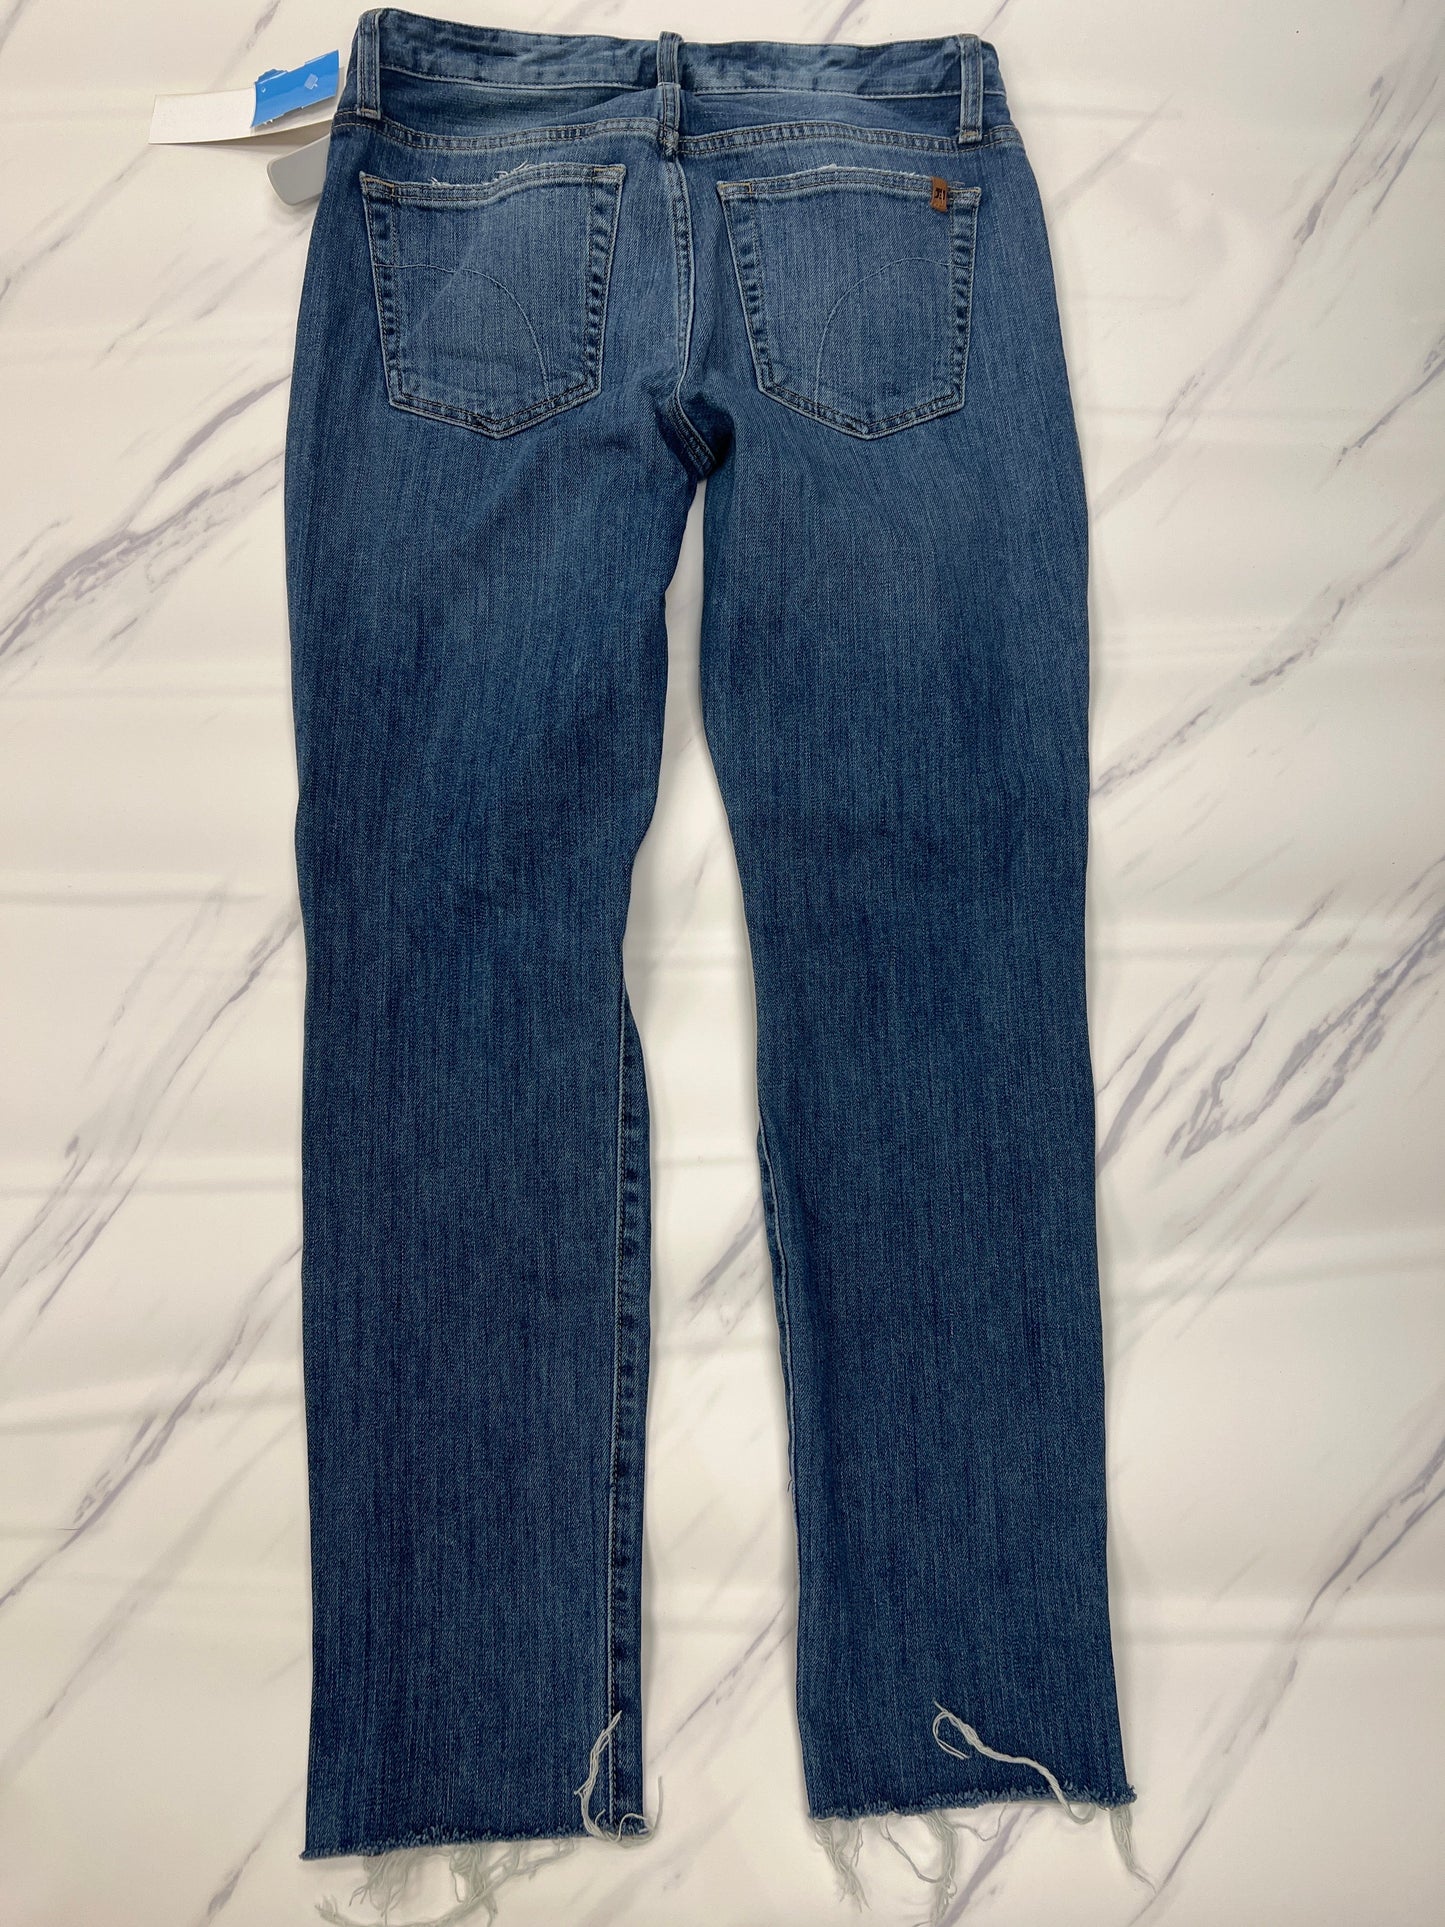 Jeans Skinny By Joes Jeans  Size: 8